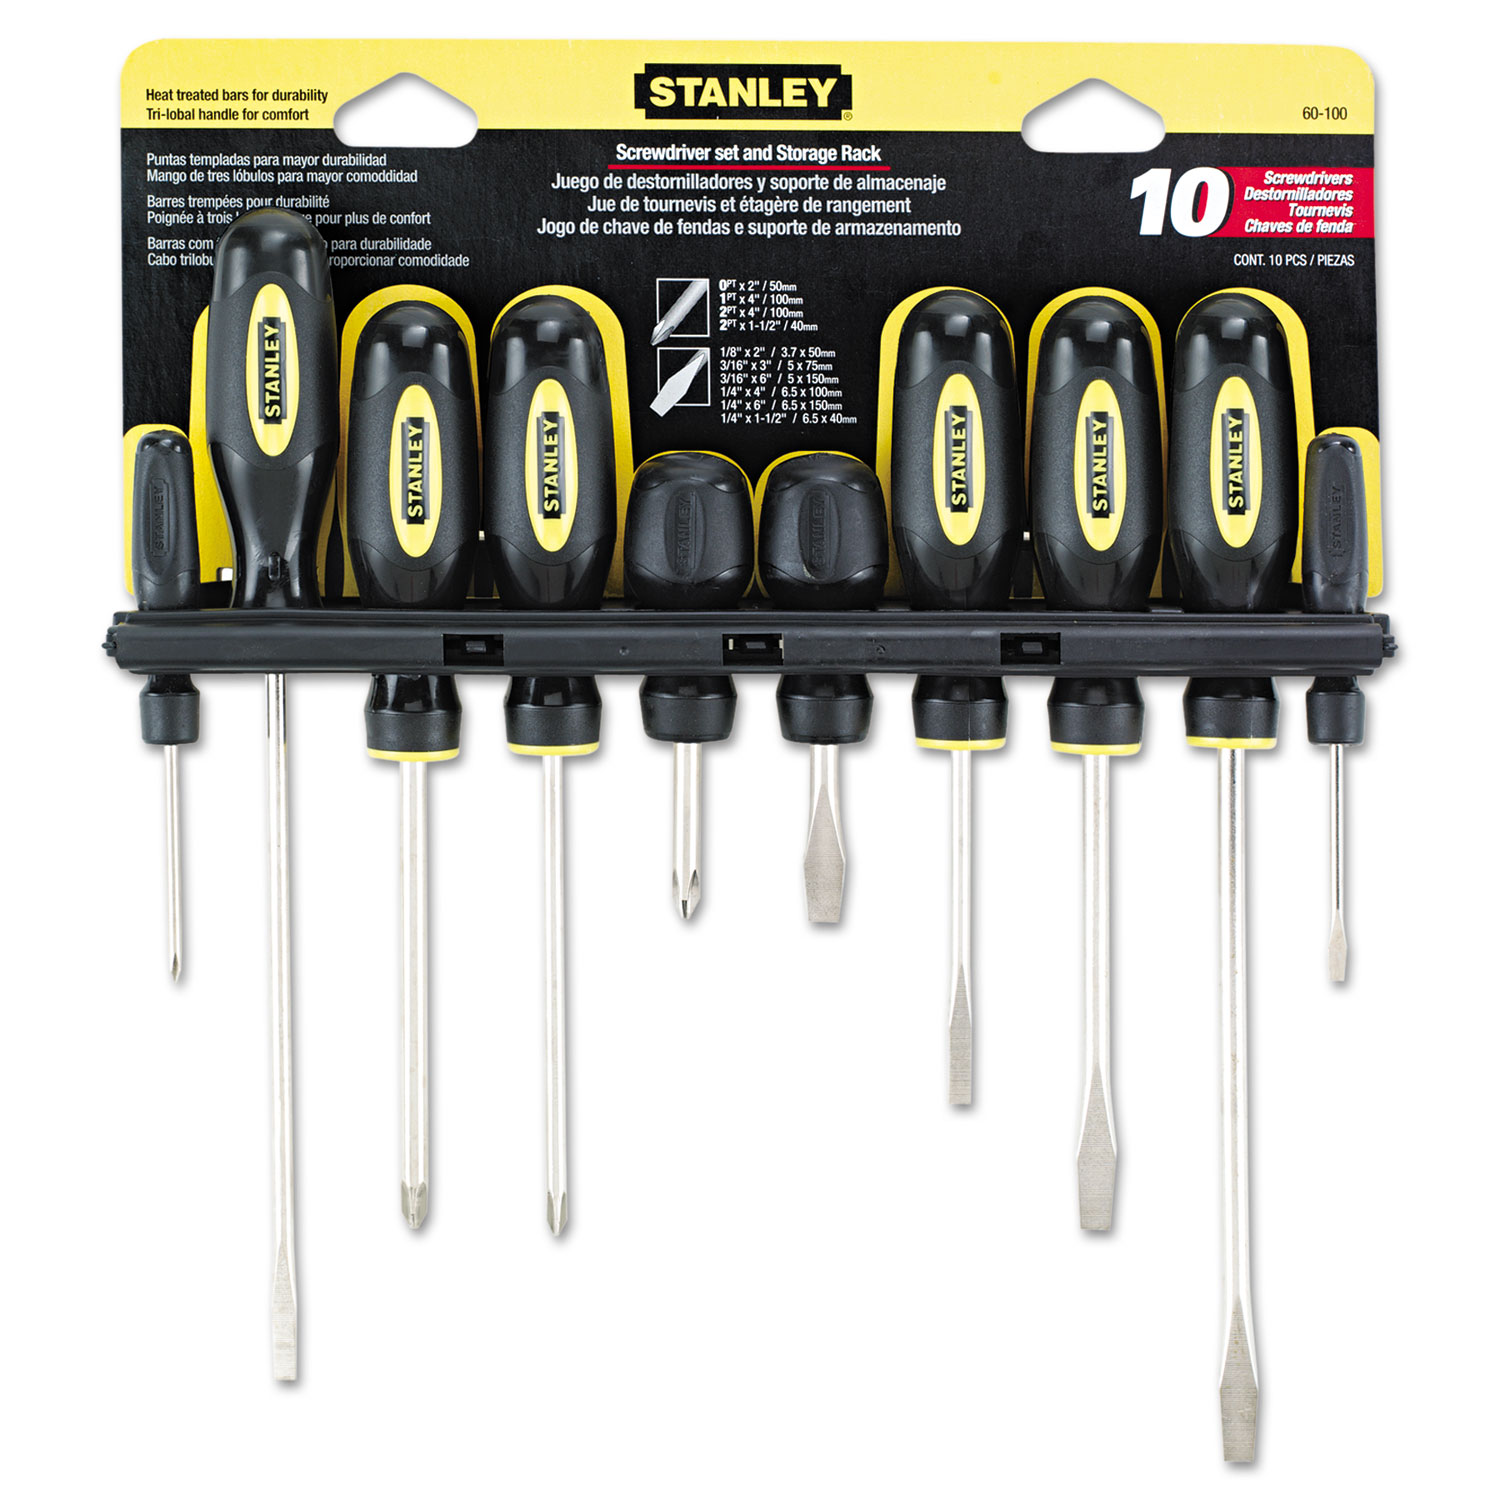  Stanley Tools 60-100 10-Piece Standard Fluted Screwdriver Set, Phillips/Slotted (BOS60100) 